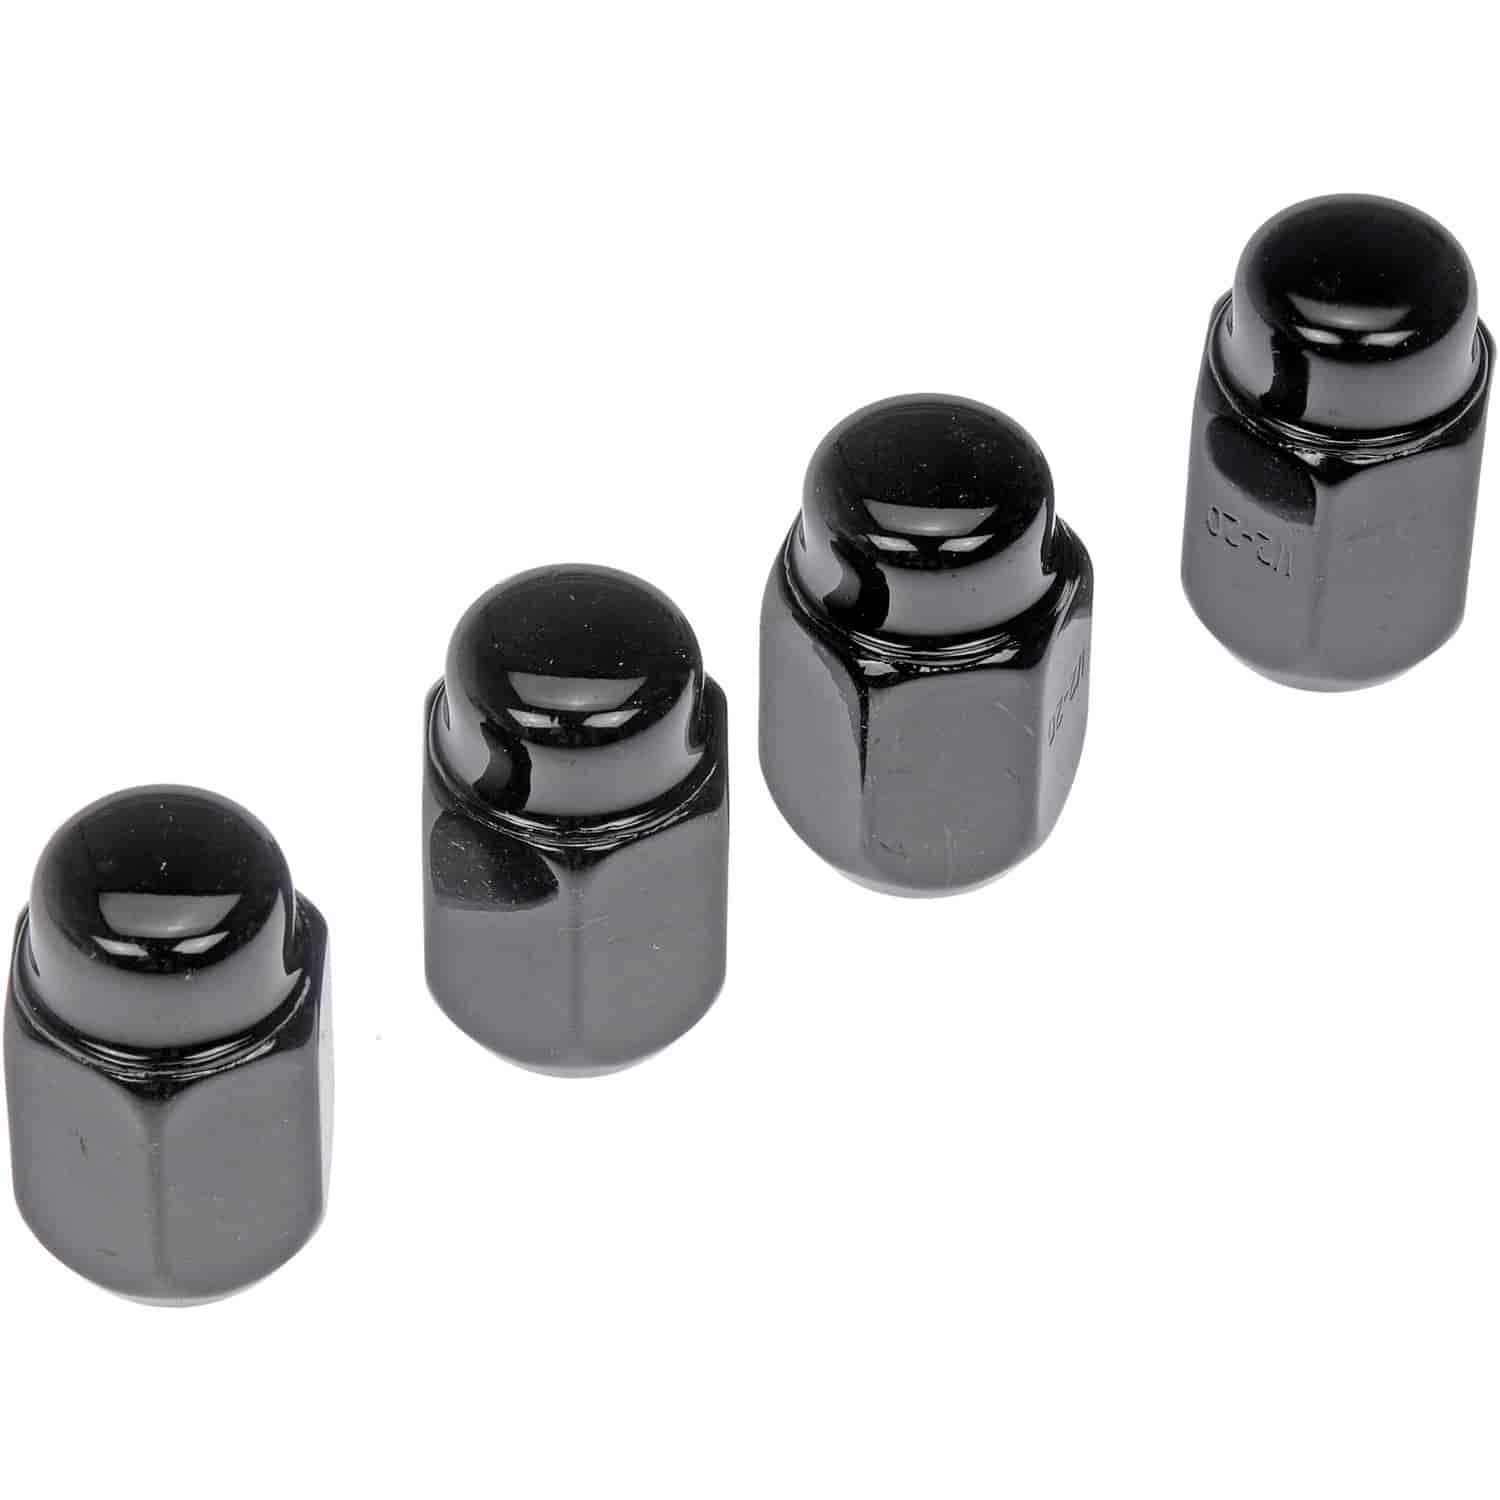 Wheel Nuts Universal 1/2 in.-20, Hex Size: 13/16 in. [Black Chrome]